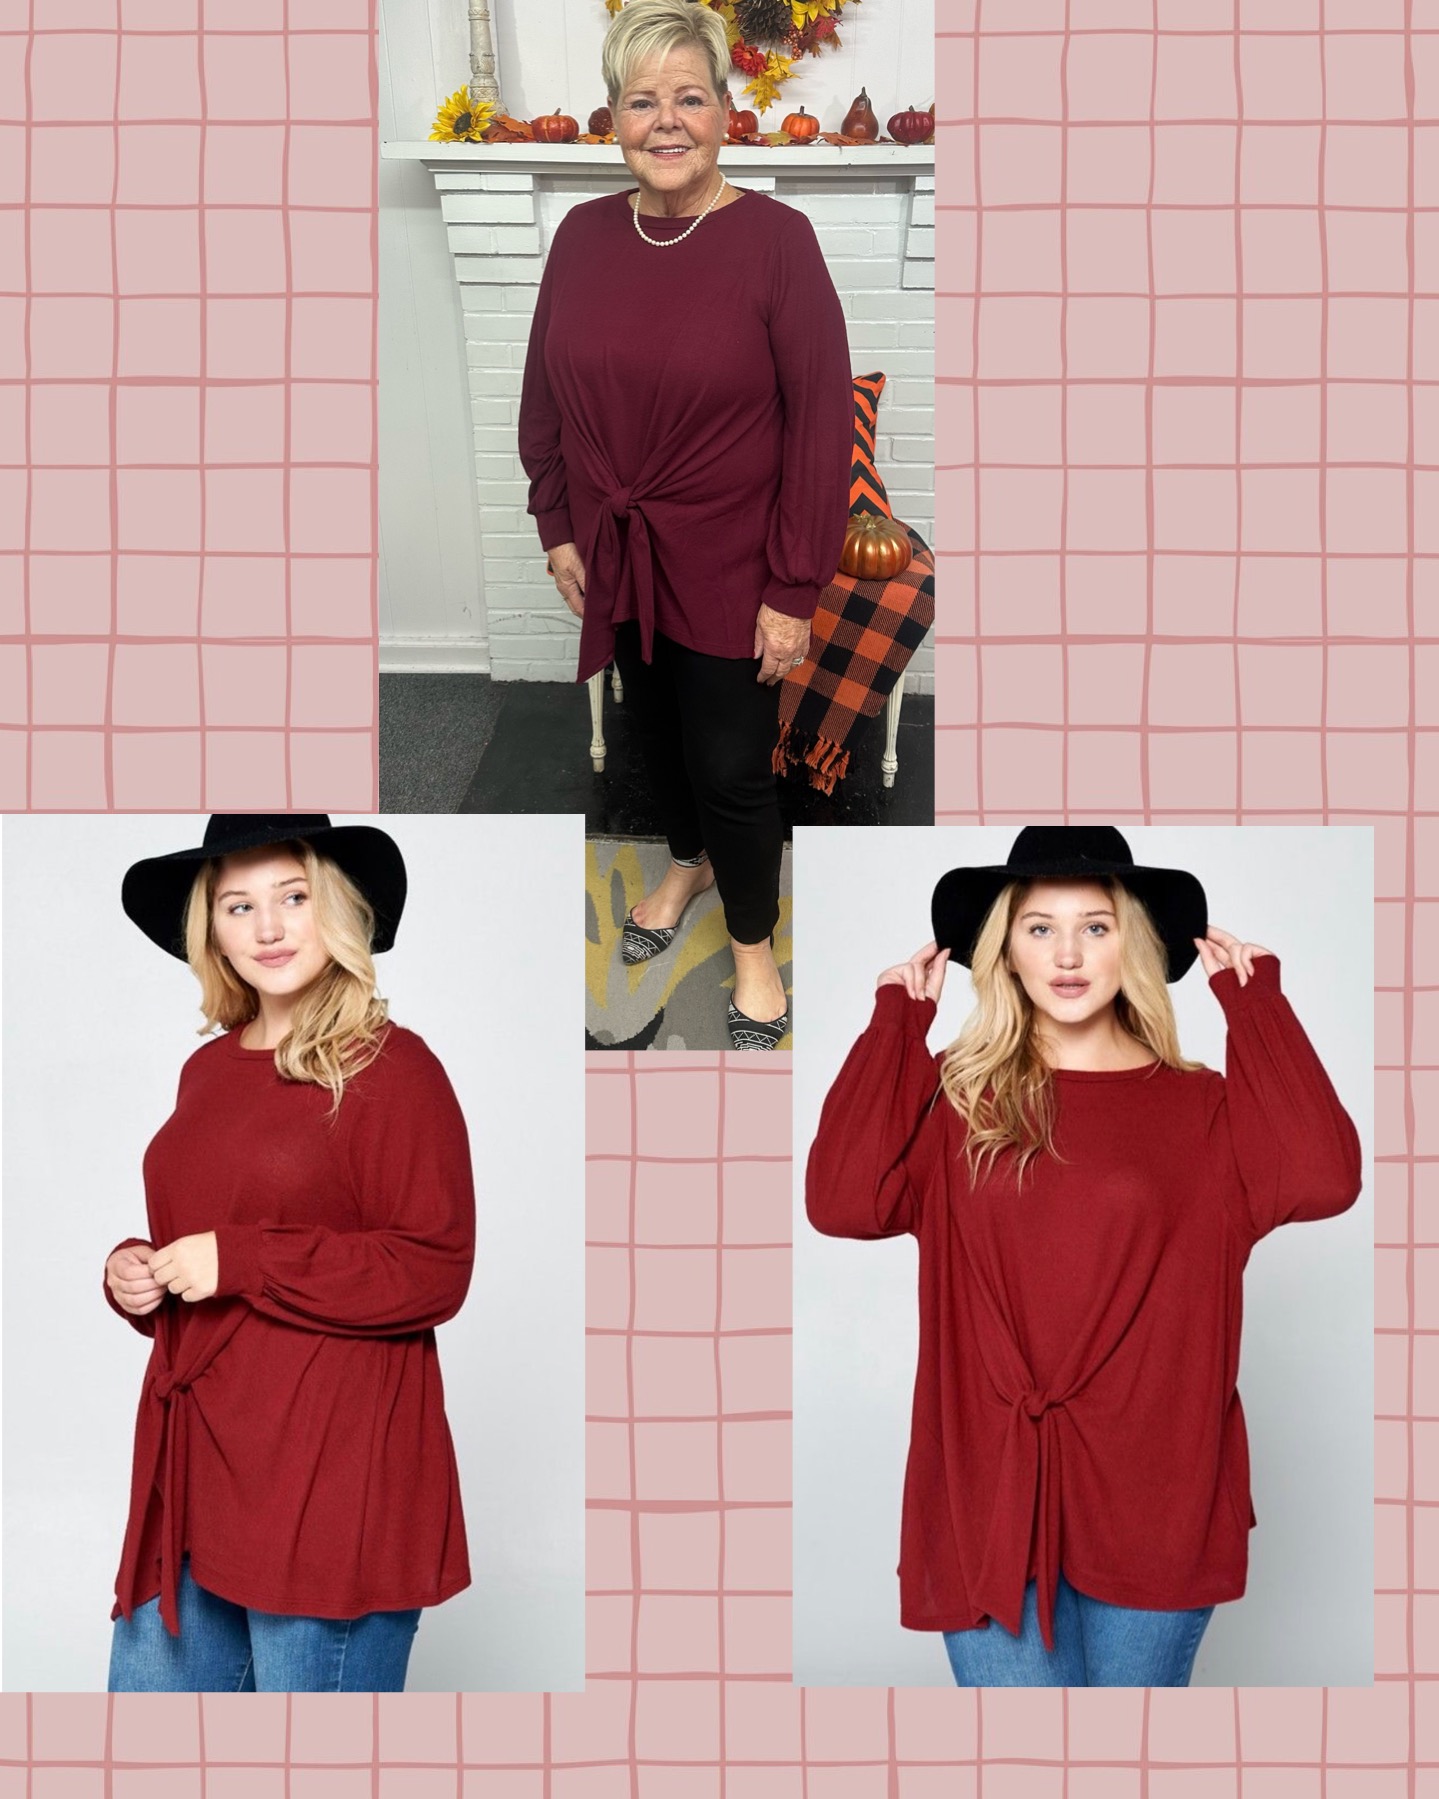 Size 1x
Cozy front tye tunic from Emerald